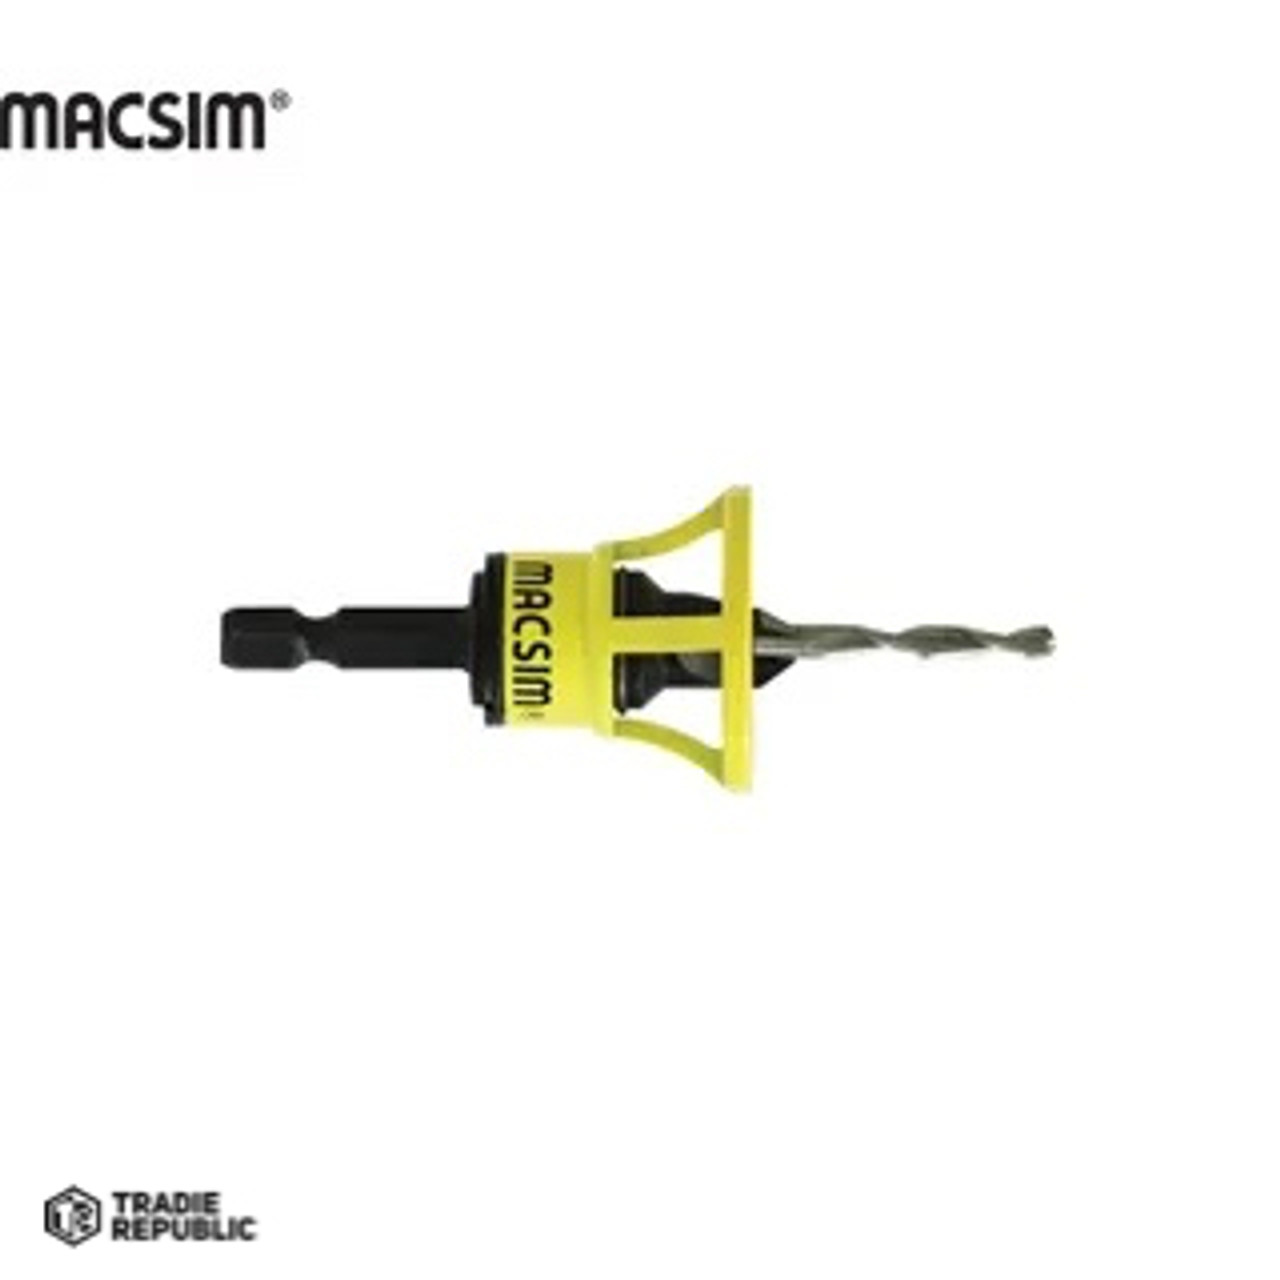 43ACTS08 Macsim Pre Drilling Countersink Tool / Clever Tool 3.20mm for 8G Screws -H43ACTS08